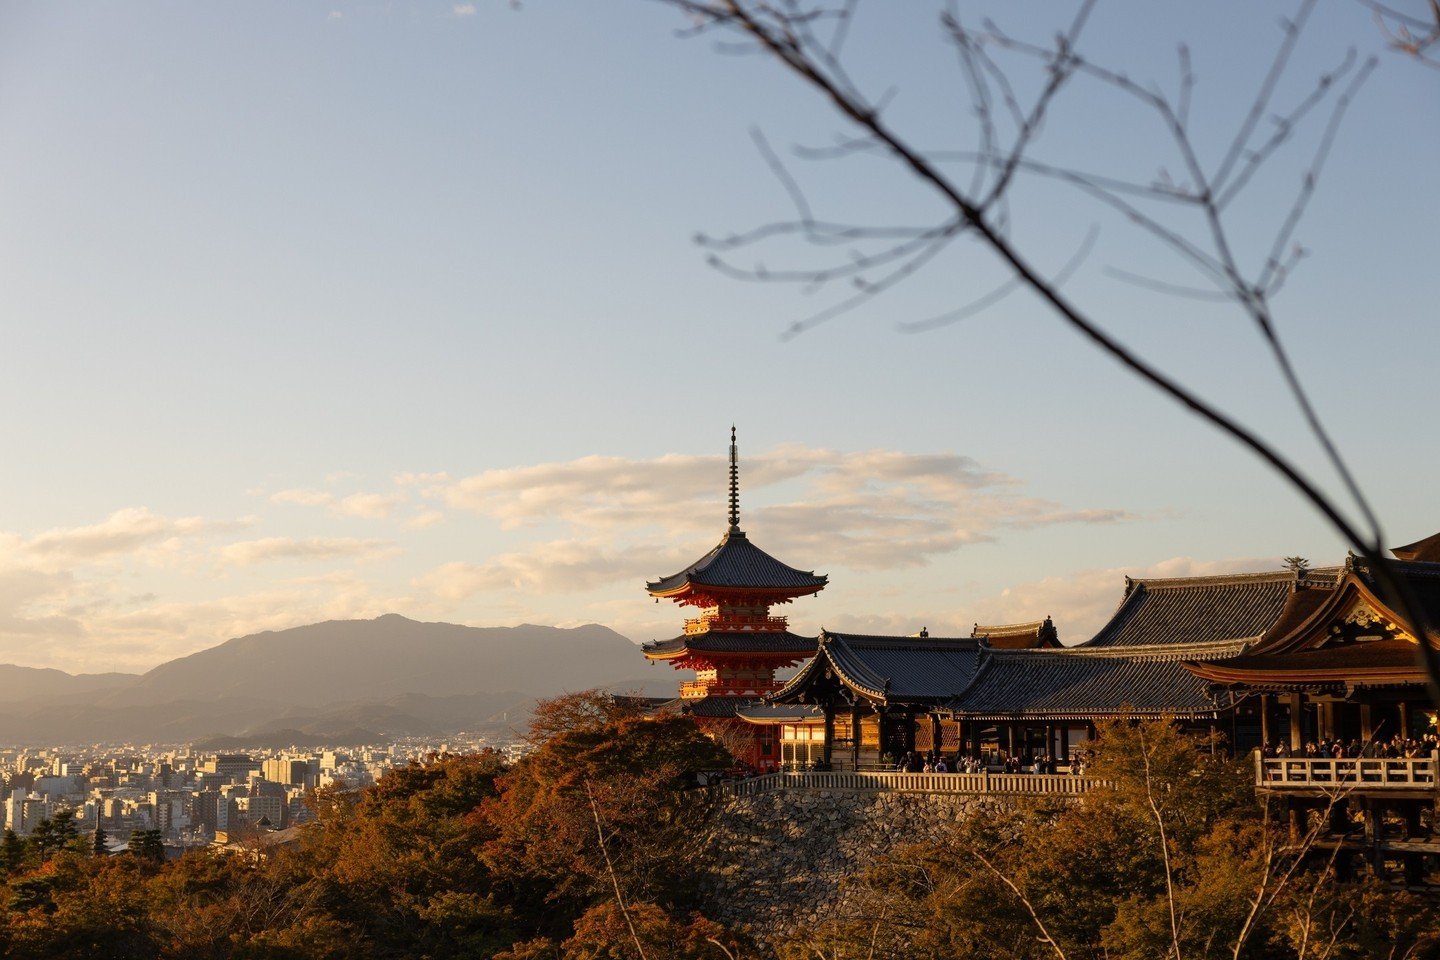 Sited on the wooded hills east of Kyoto, Kiyomizudera Temple, which translates to 'pure water temple,' is one of the most celebrated temples in Japan. ⁠
⁠
It is constructed at the base of the Otowa Waterfall, which has been divided into three streams